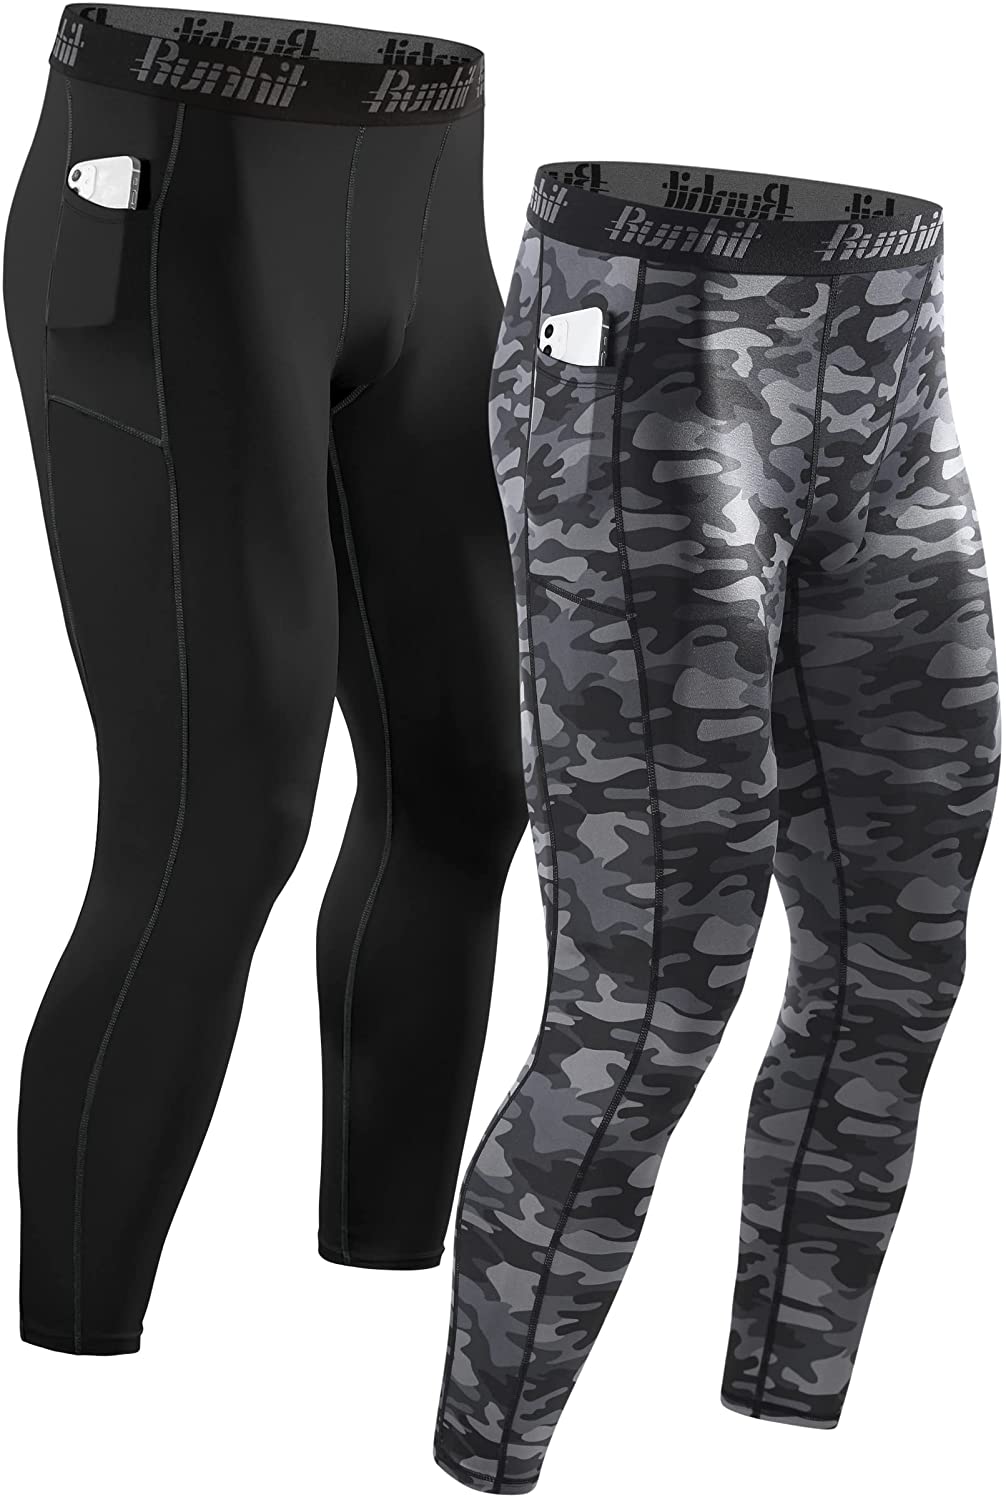 Men's Compression Pants Running Tights Leggings with Phone Pocket